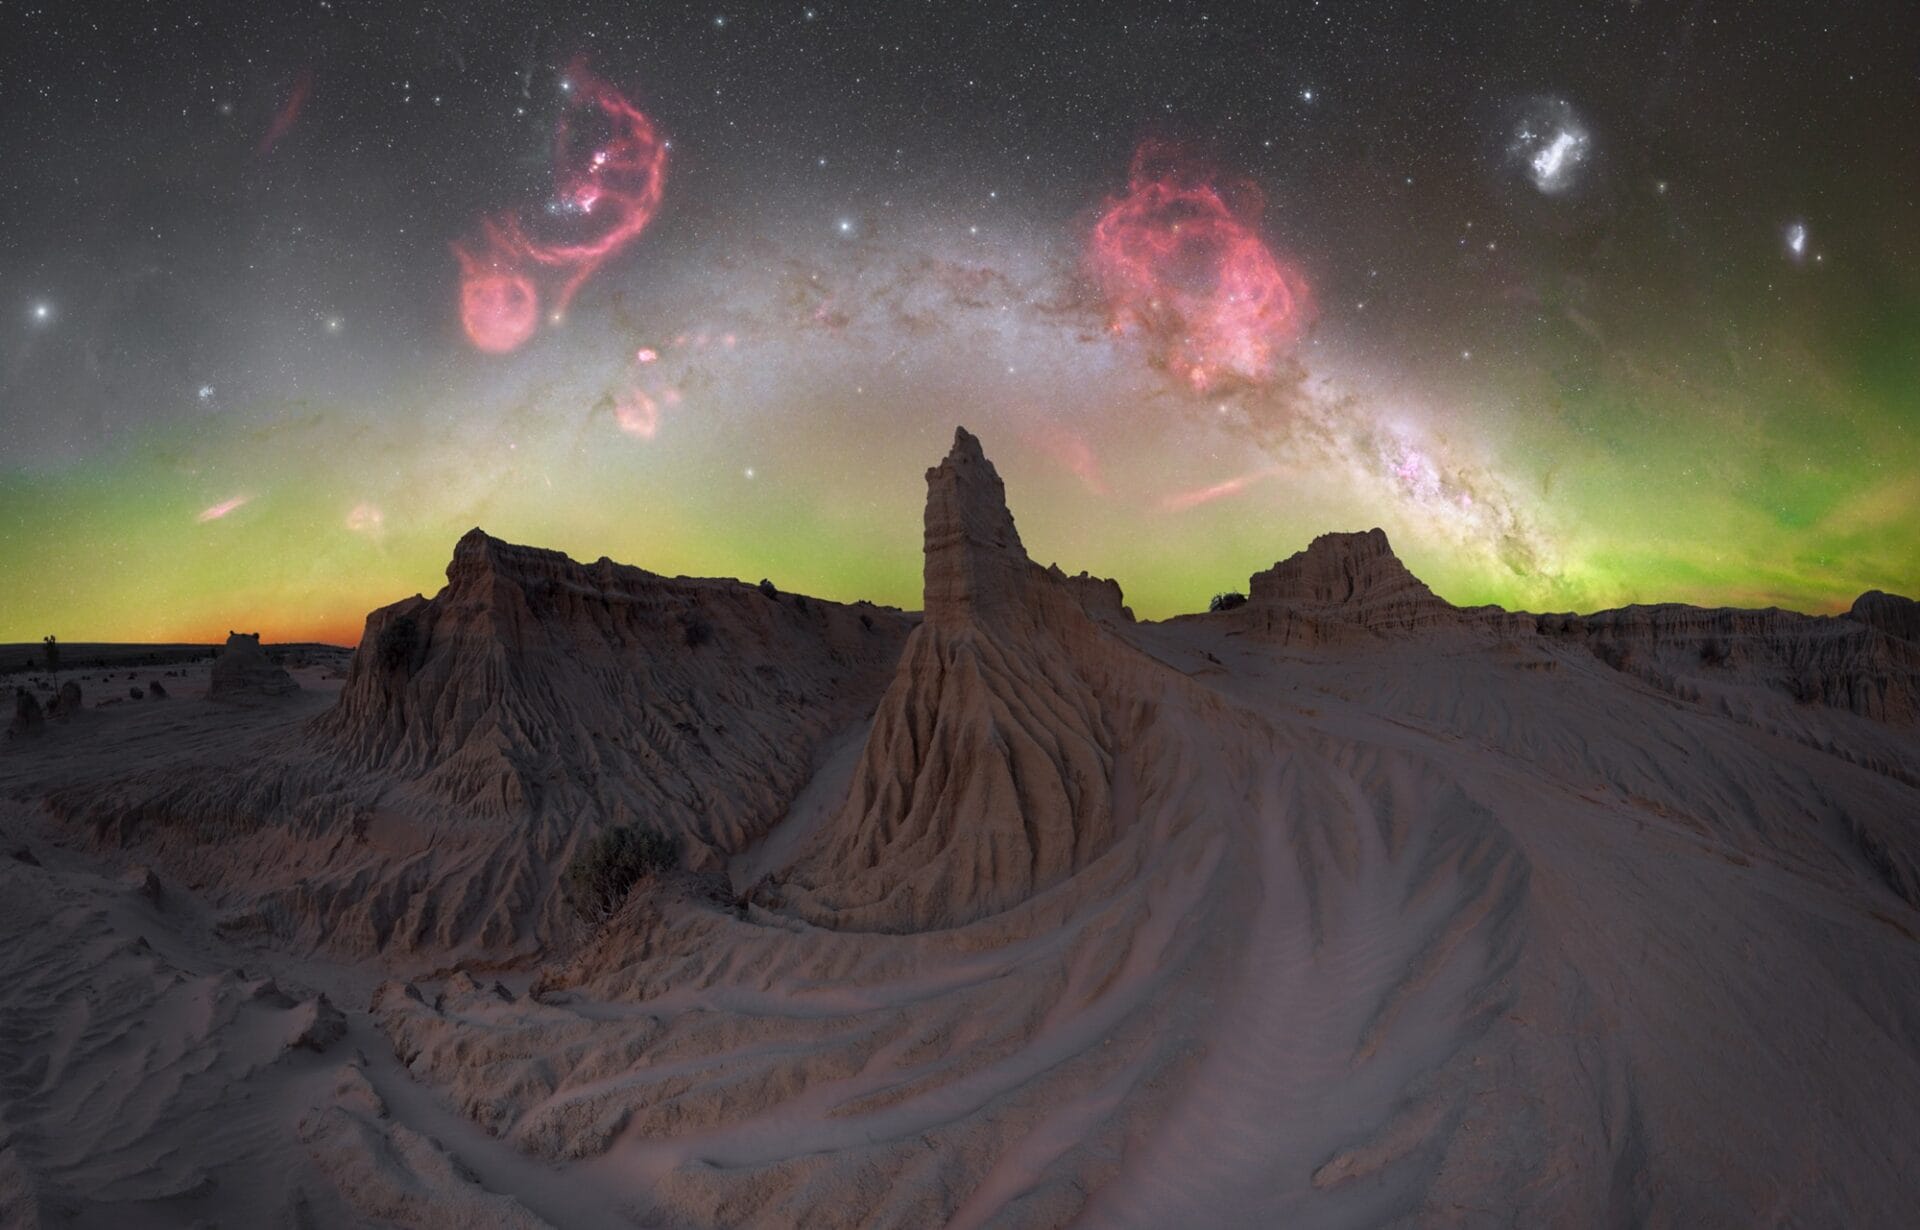 the brilliant star studded milky way above a desert landscape with hoodoos and sand